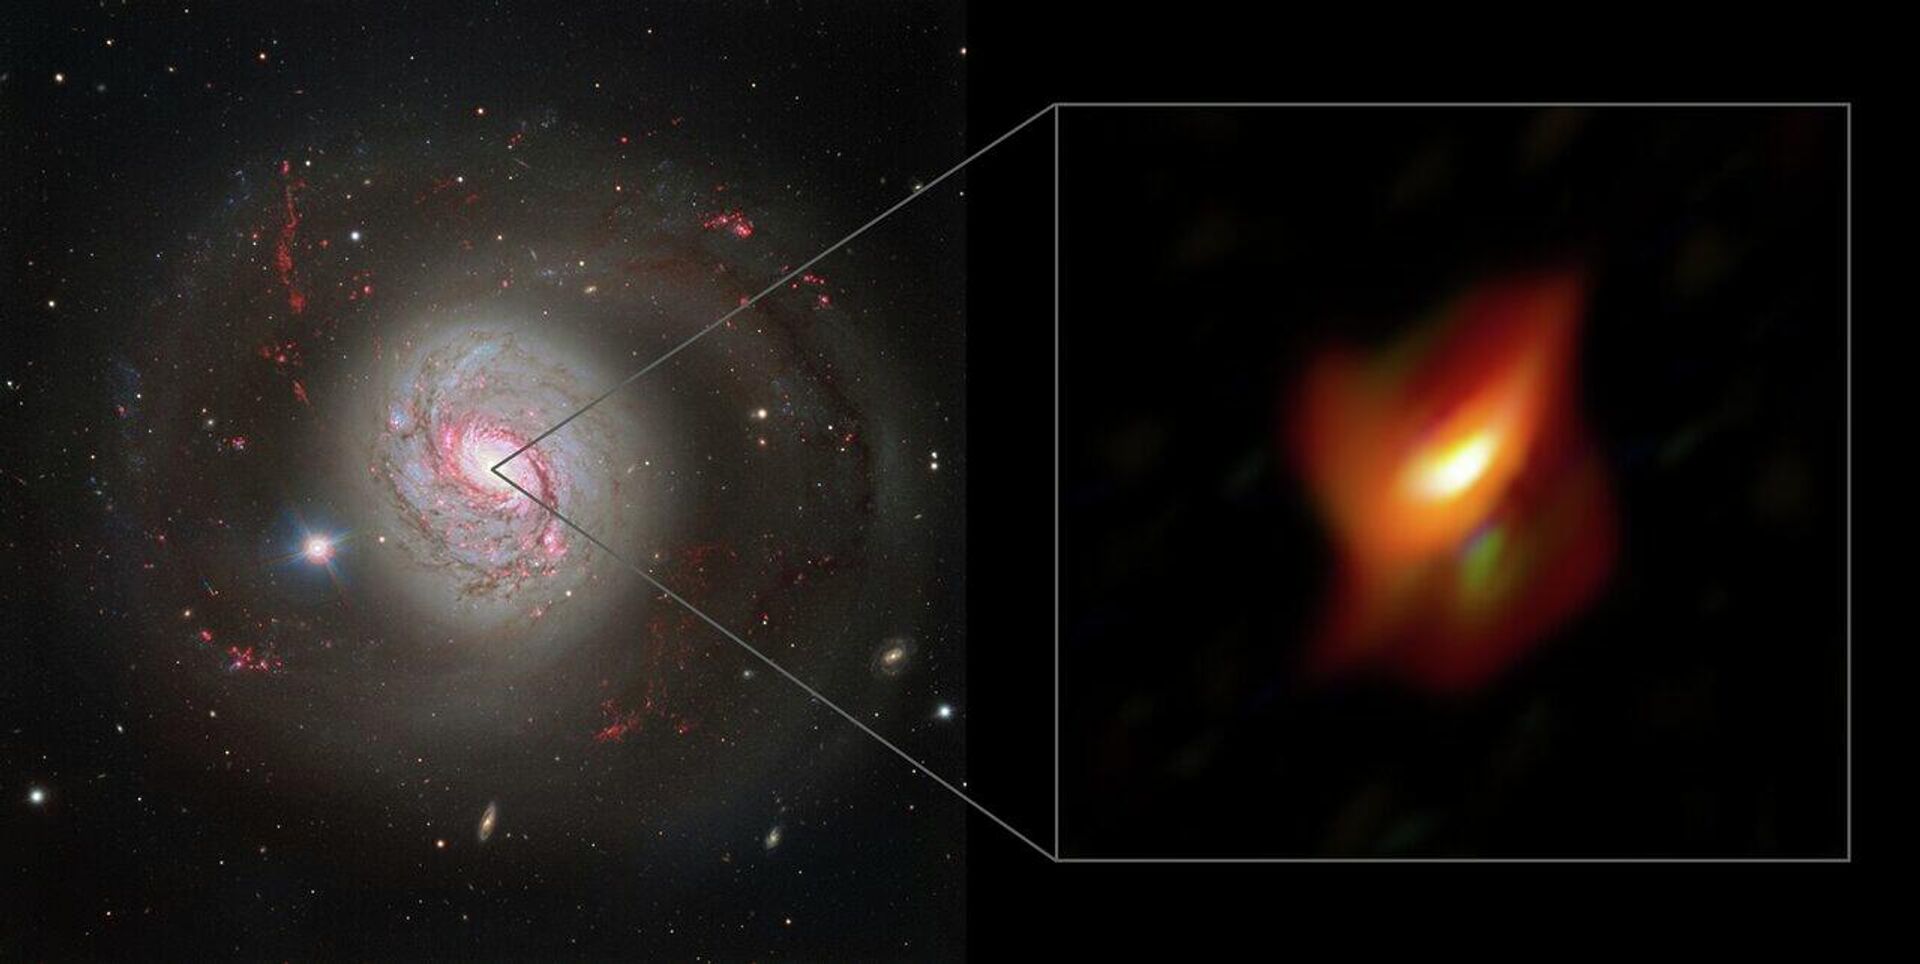 The left panel of this image shows a dazzling view of the active galaxy Messier 77 captured with the FOcal Reducer and low dispersion Spectrograph 2 (FORS2) instrument on ESO’s Very Large Telescope. - Sputnik International, 1920, 19.02.2022